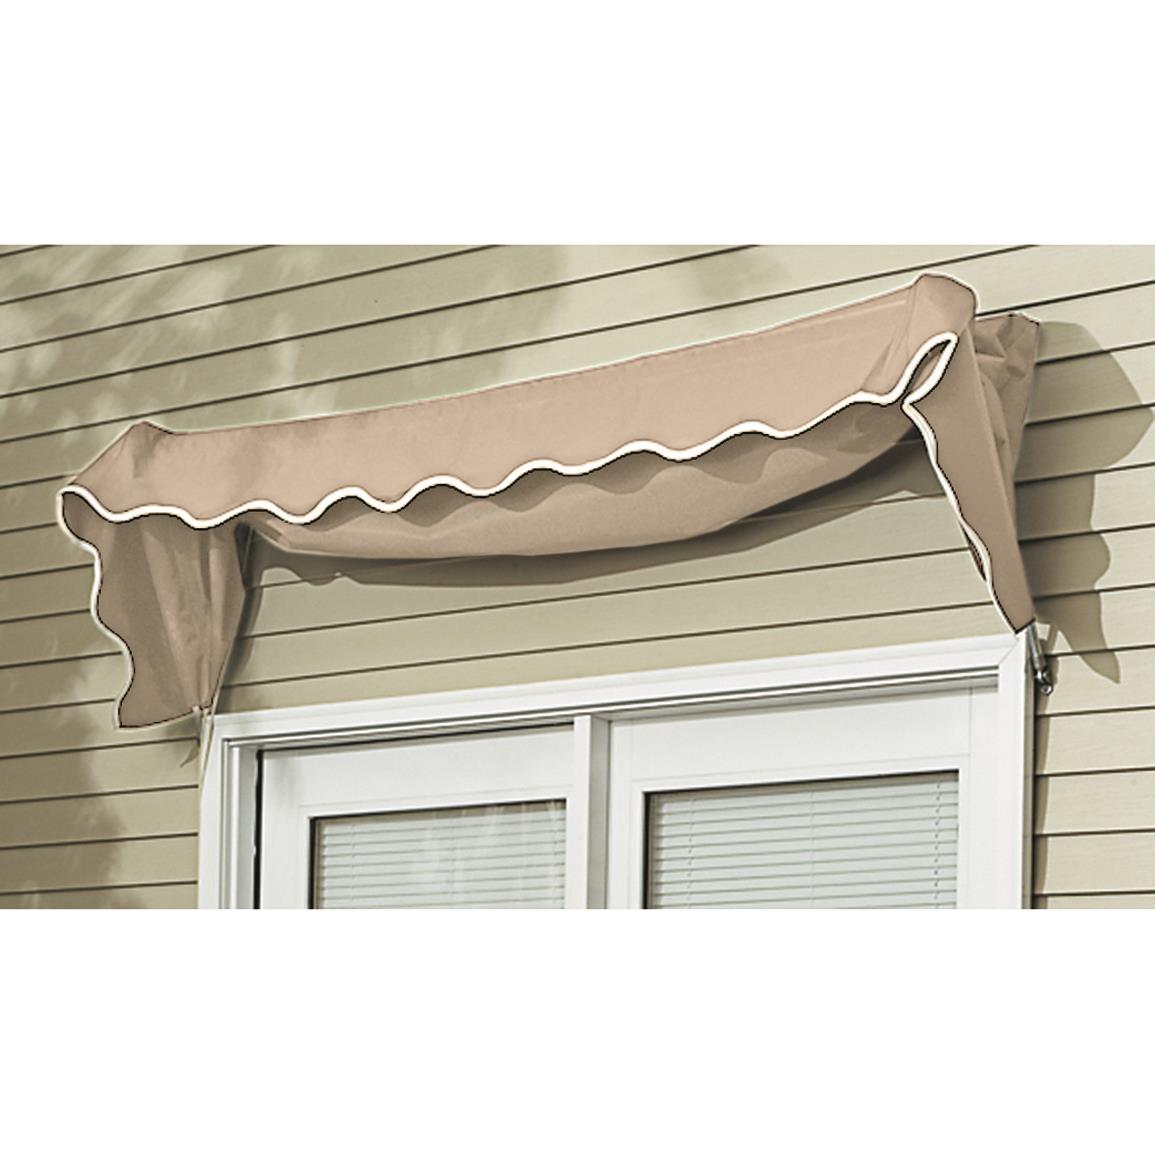 CASTLECREEK 6 Window And Door Awning 581817 Awnings Shades At